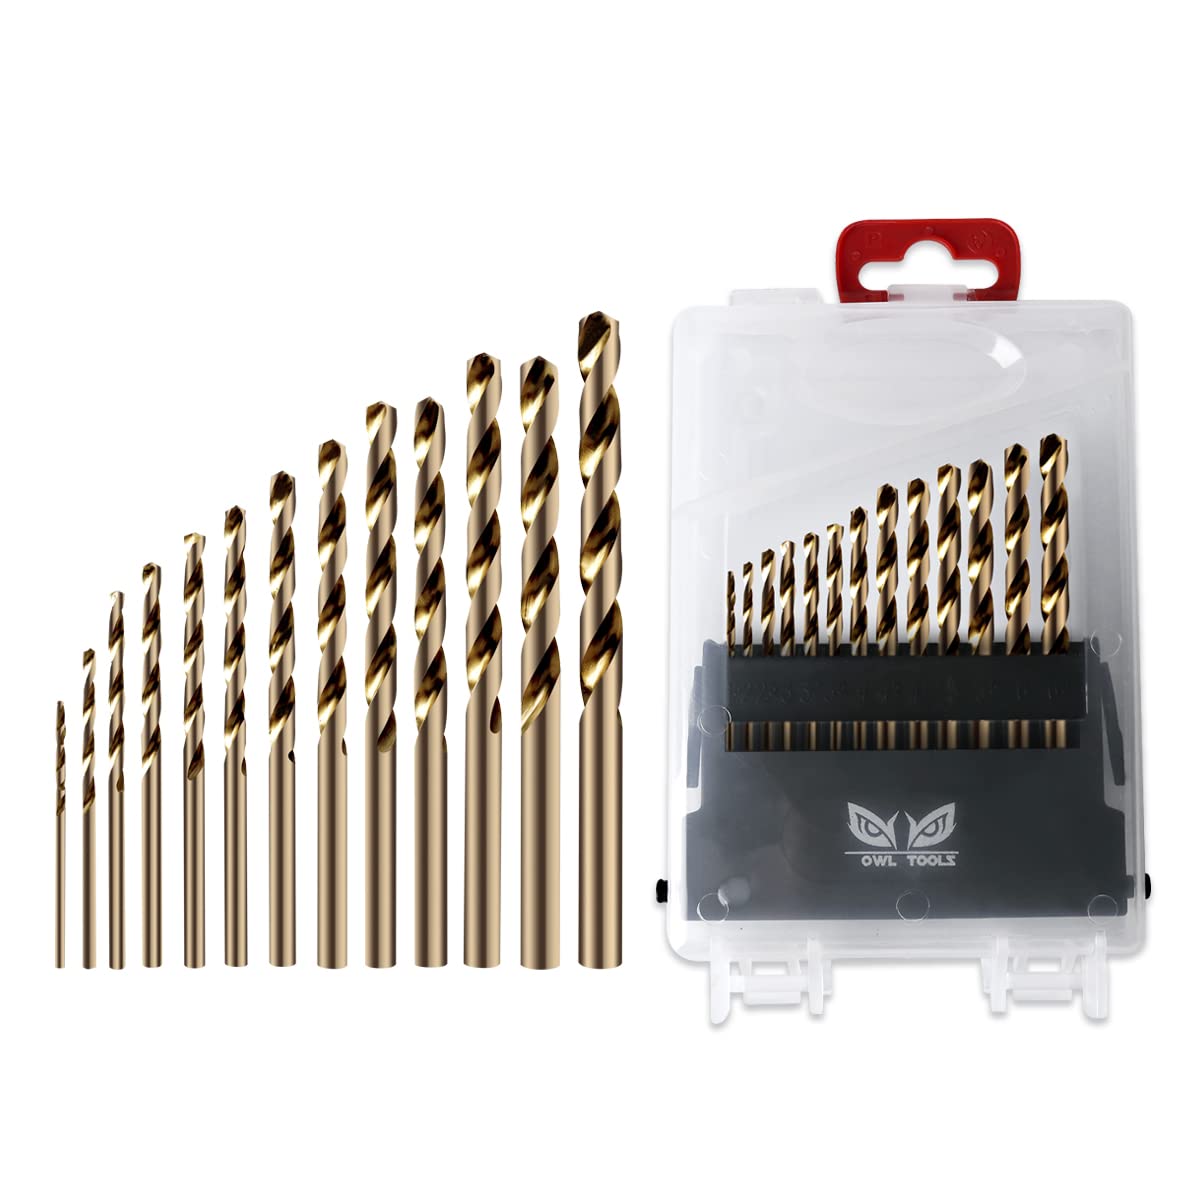 Owl Tools Cobalt Drill Bit Set - 13 Piece M35 - Metric Size Cobalt Drill Bits with Storage Case - Perfect Drill Bits for Metal, Hardened & Stainless Steel, Cast Iron, and More!